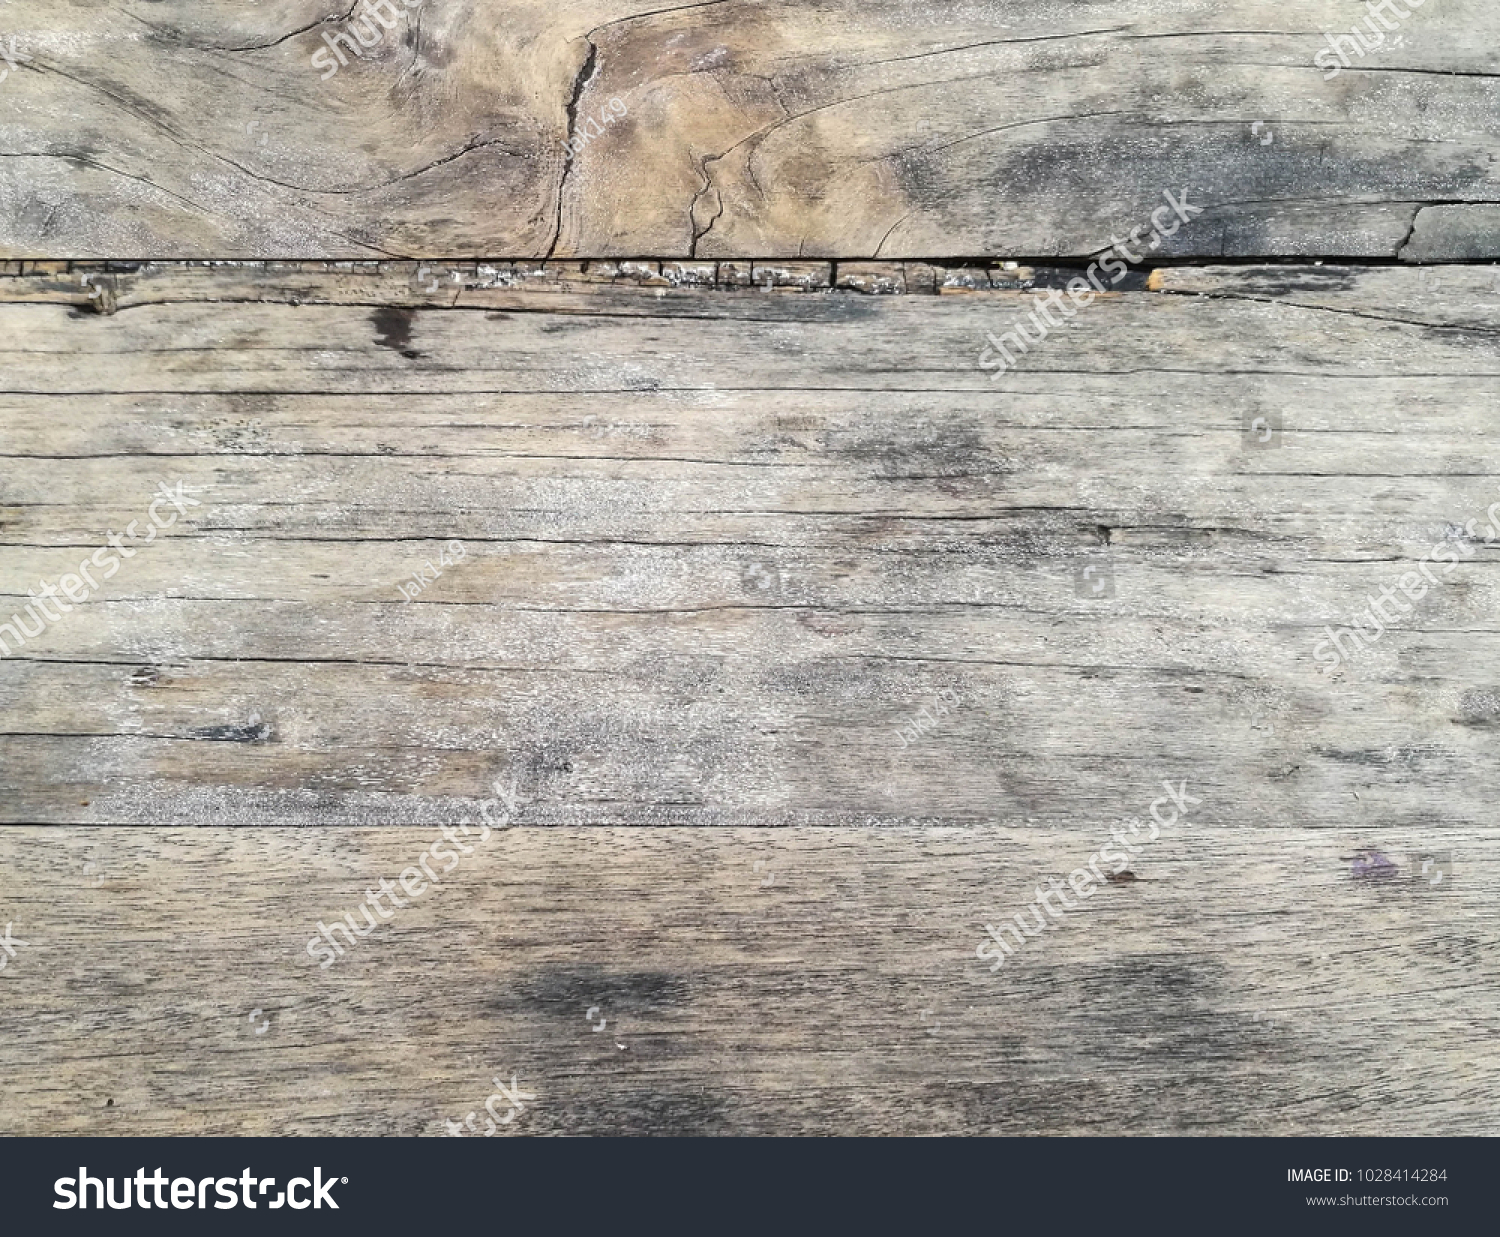 Texture Old Wood Desk Surface Can Stock Photo Edit Now 1028414284